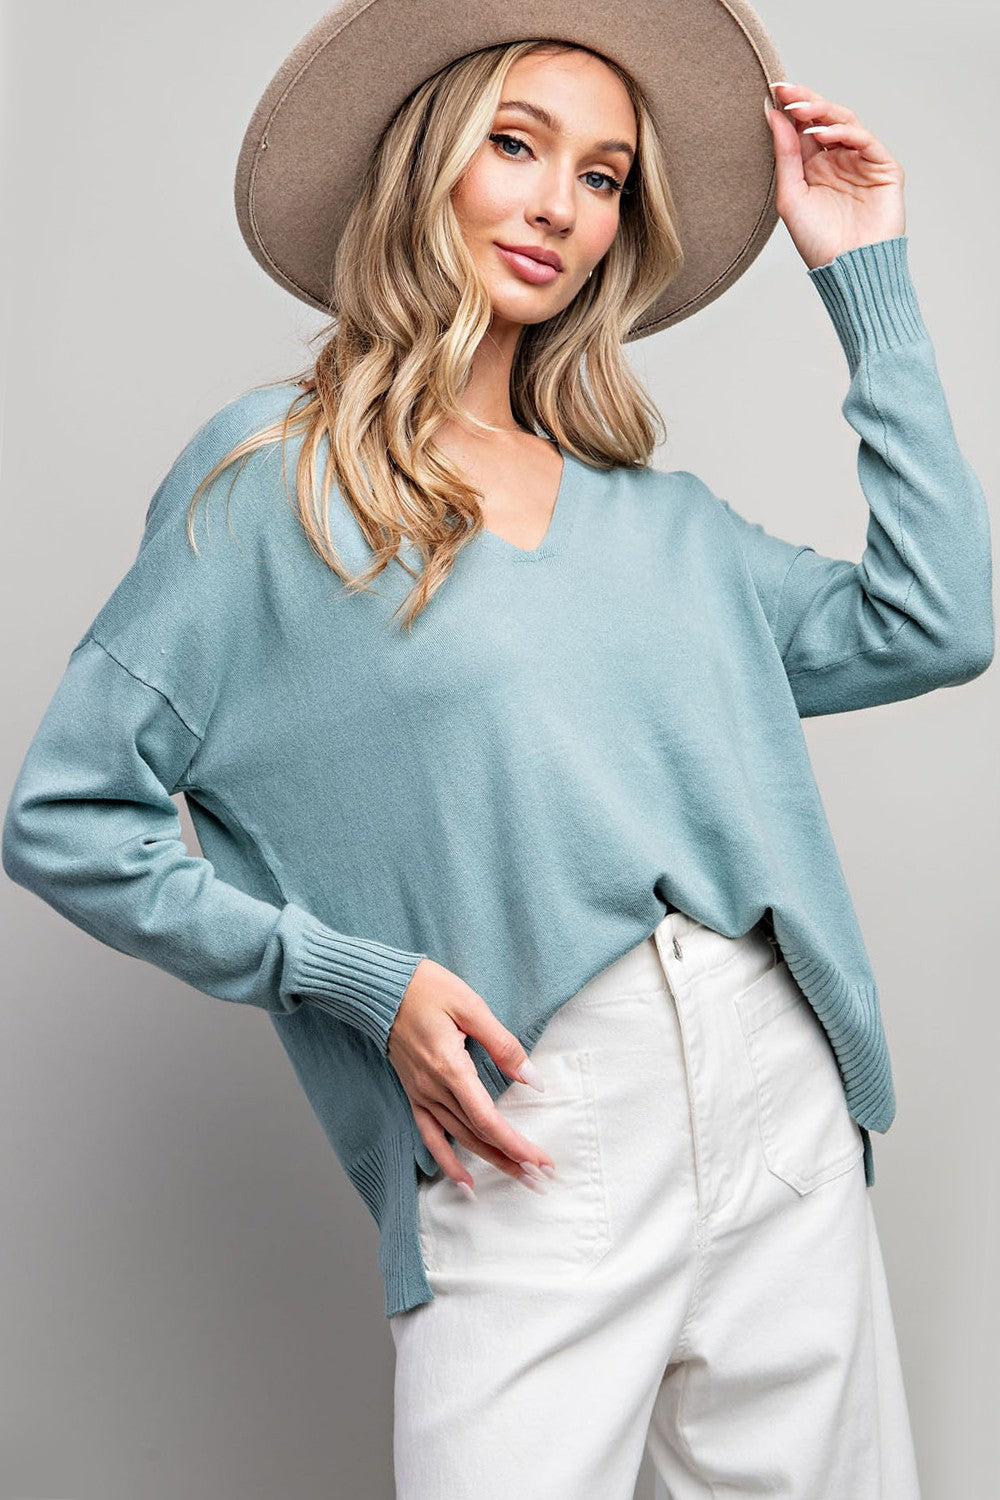 : A Lot Of Leisure  V-Neck Pale Sea Blue Knit Top - Catching Fireflies Boutique